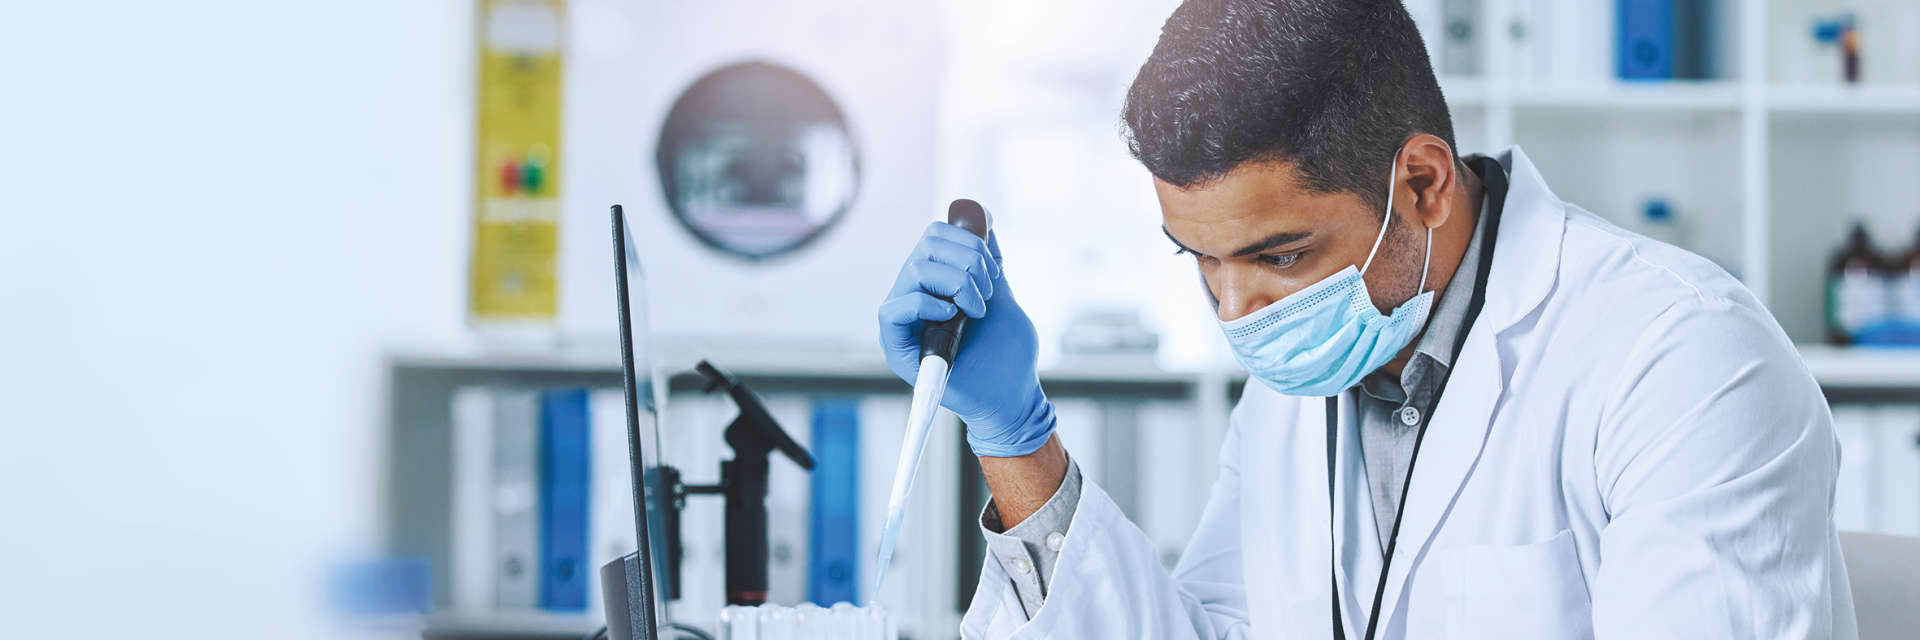 Enzymes, NGS, Black male pipetting in front of computer screen in a laboratory environment